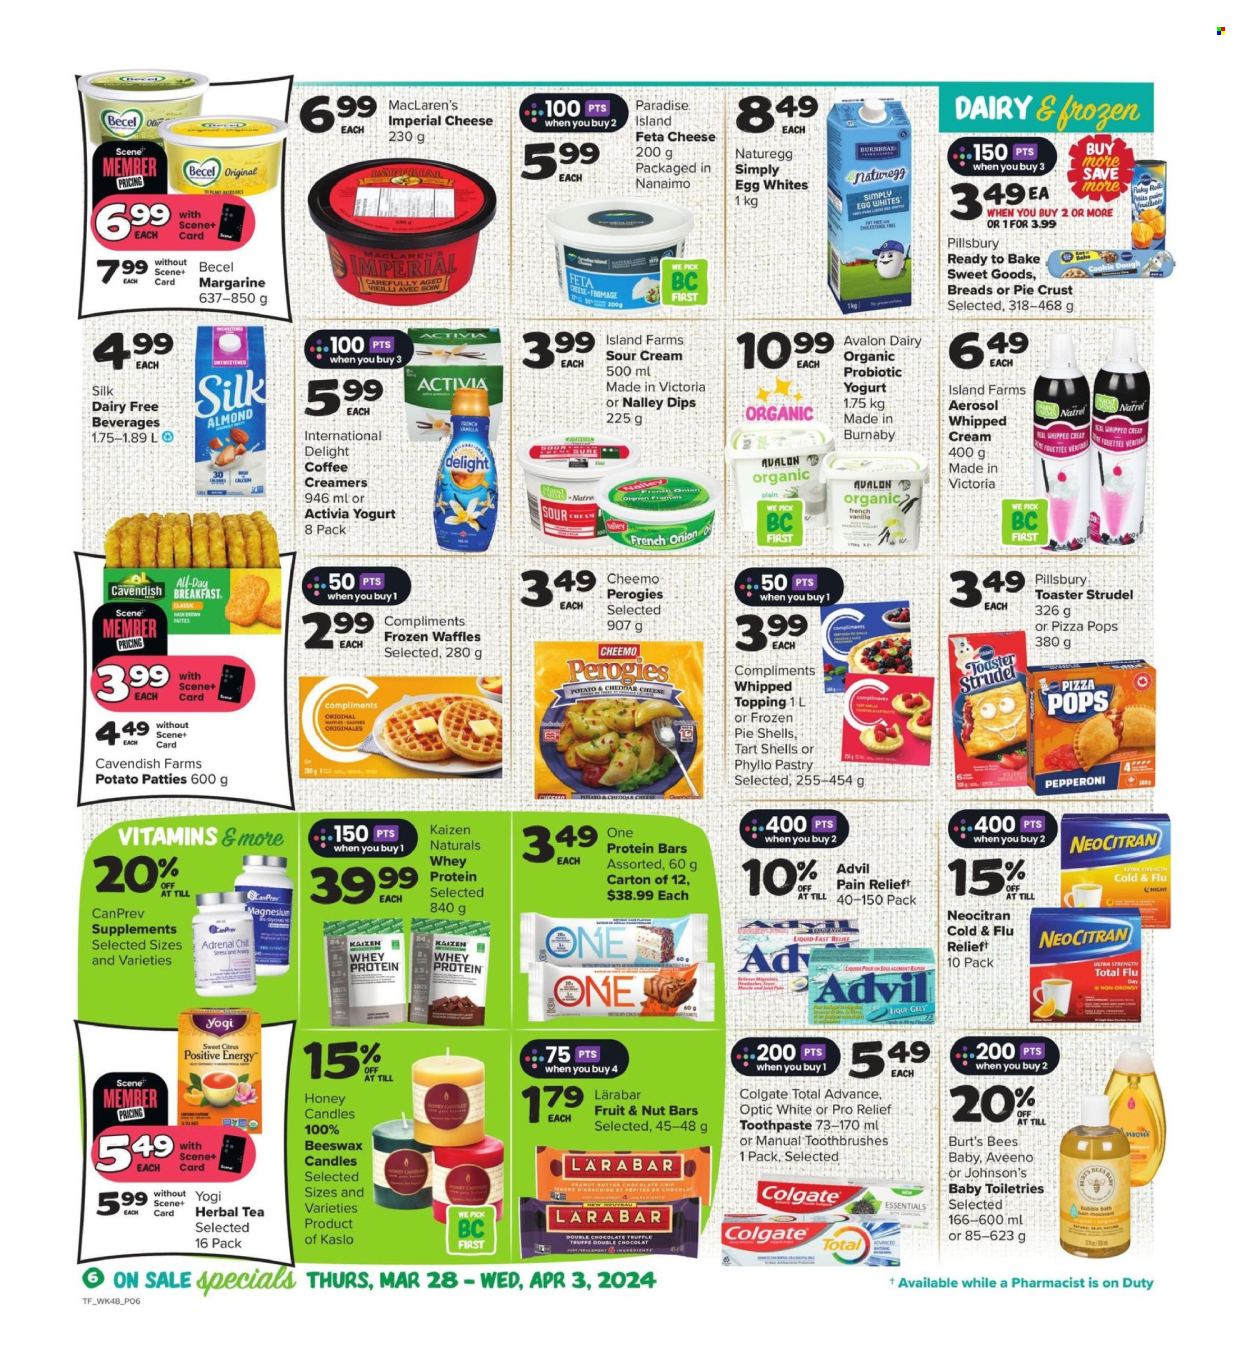 Thrifty Foods flyer  - March 28, 2024 - April 03, 2024.